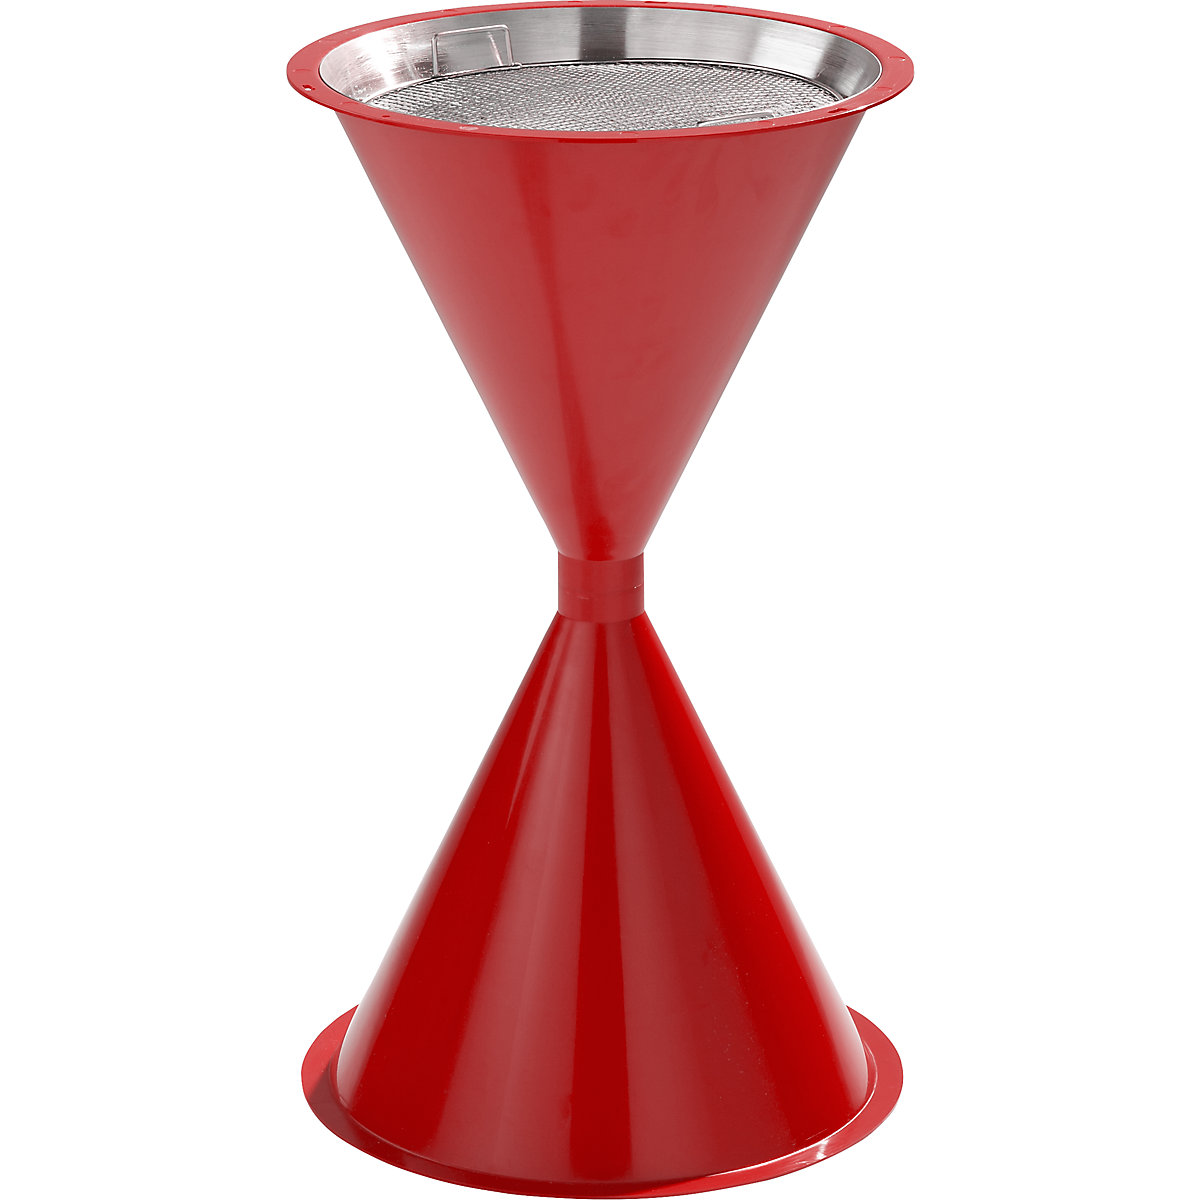 VAR – Conical pedestal ashtray made of plastic, without hood, traffic red